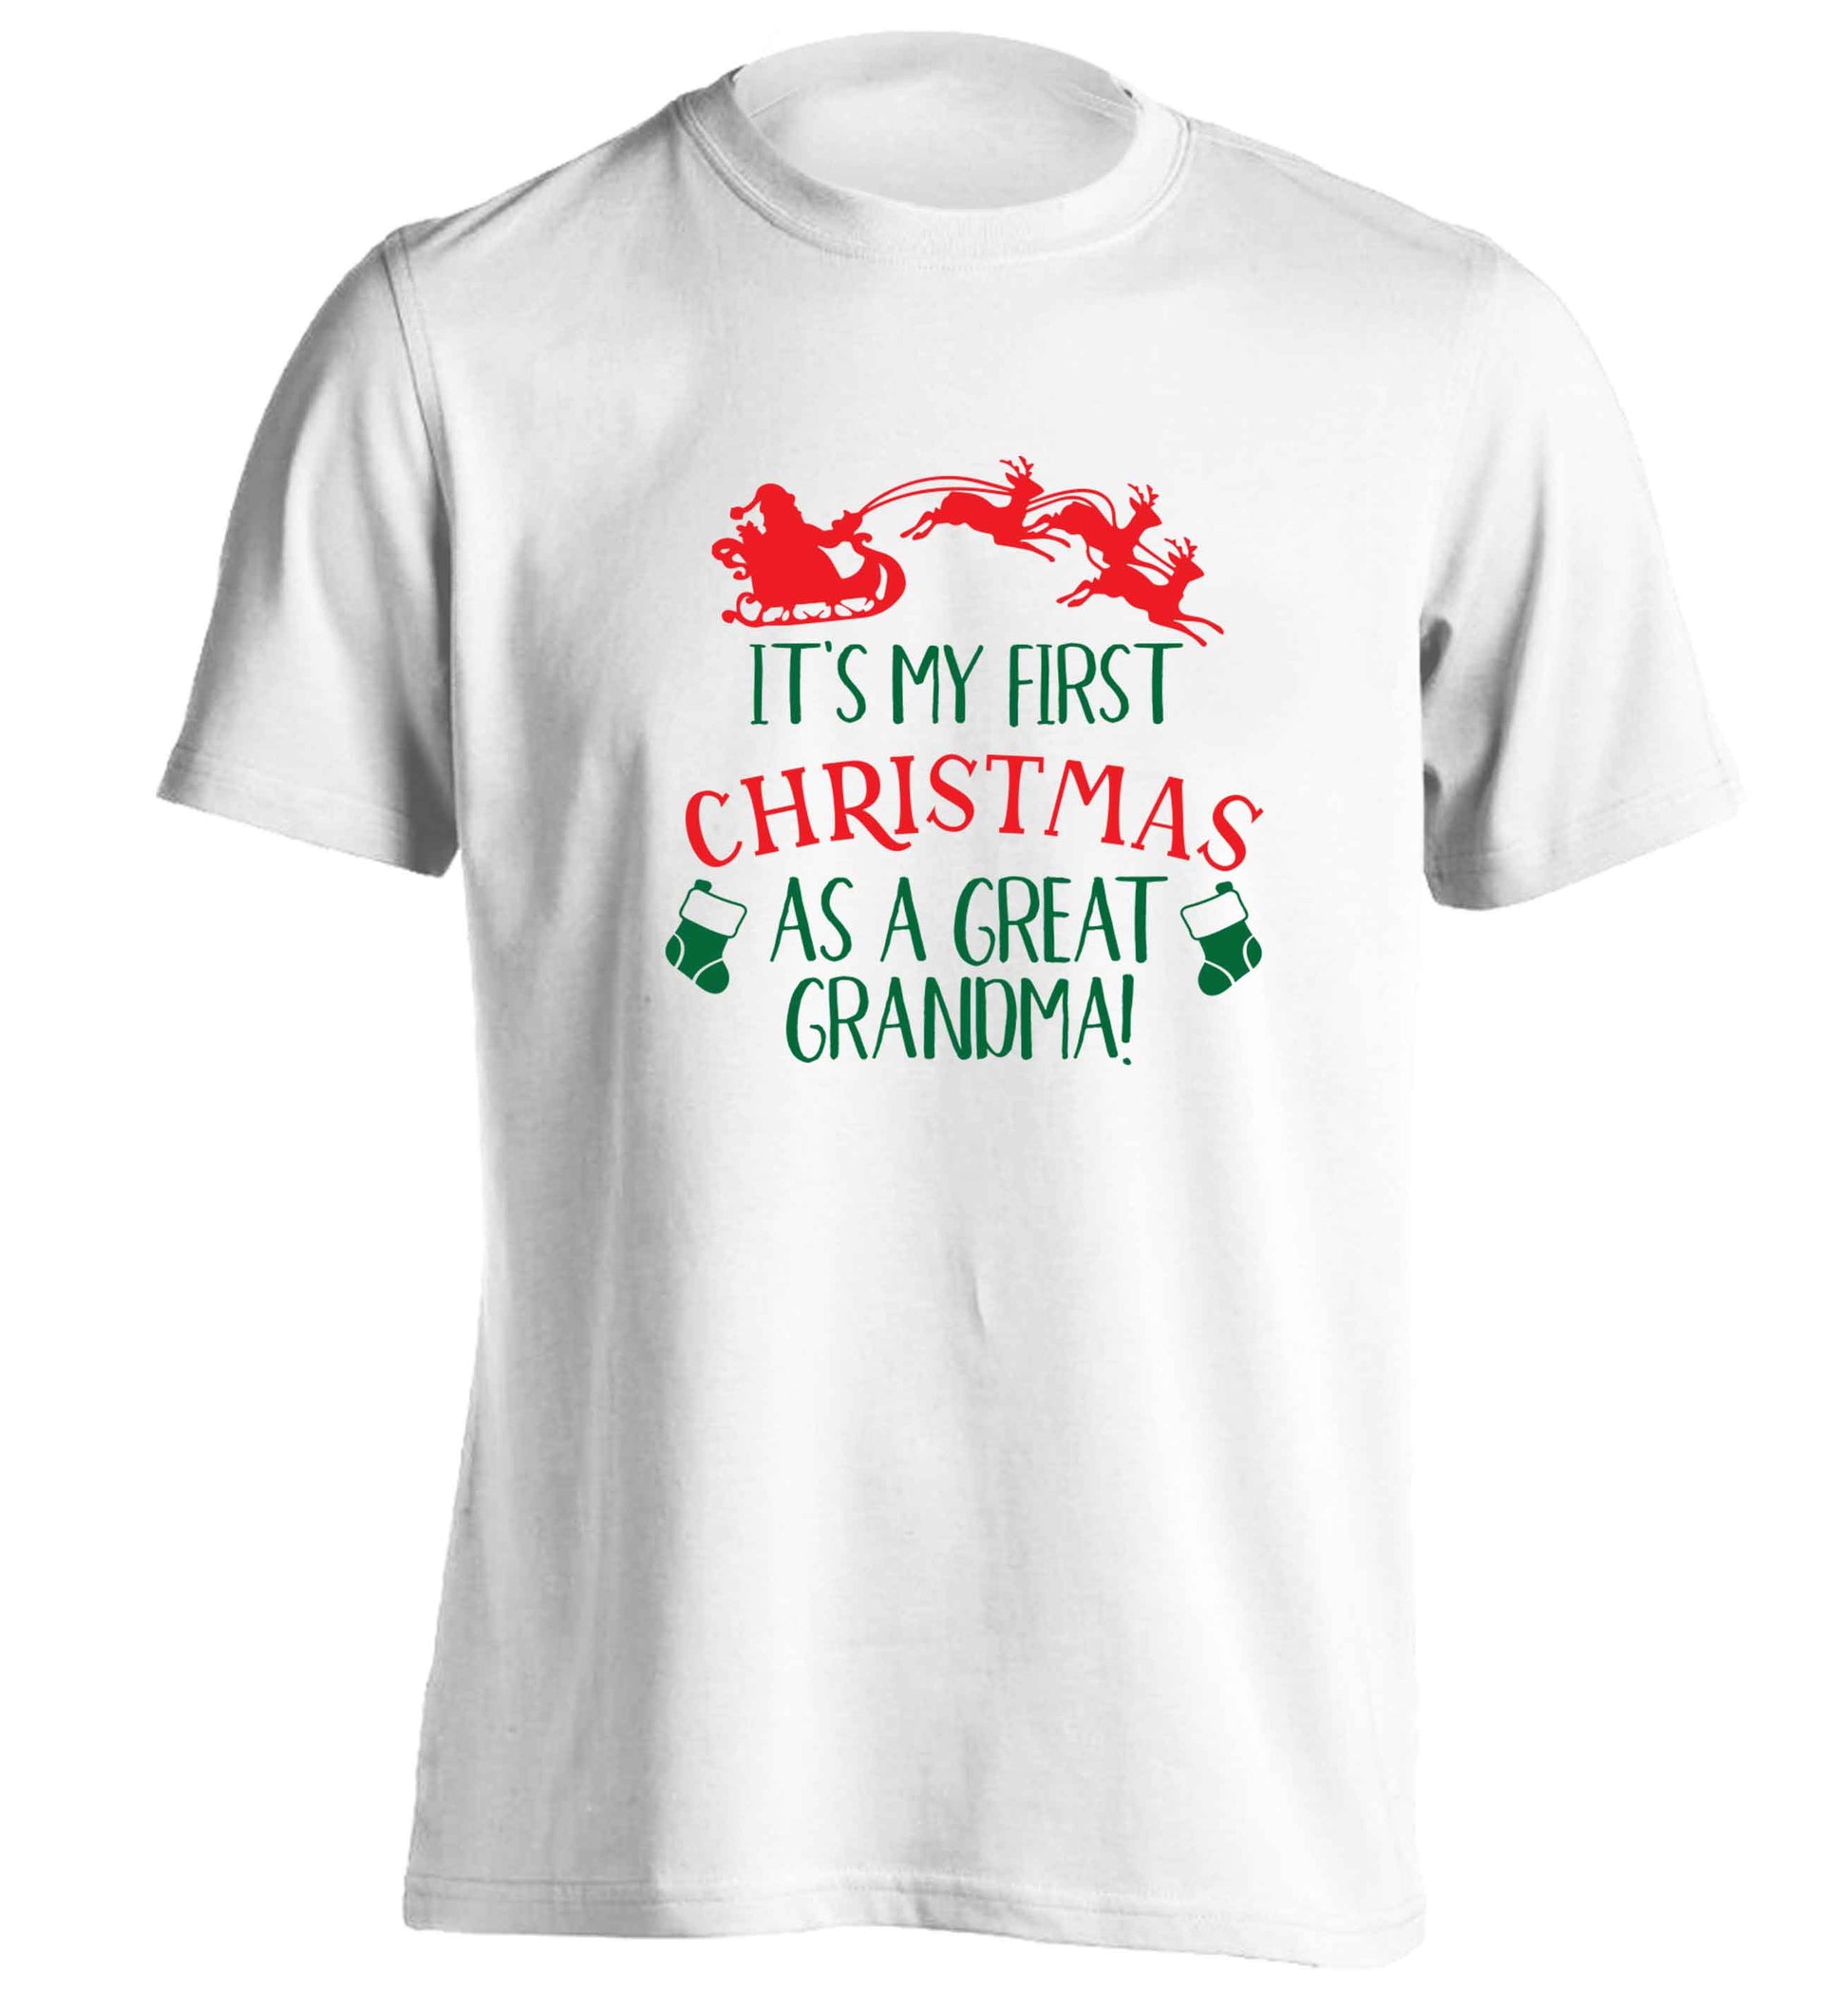 It's my first Christmas as a great grandma! adults unisex white Tshirt 2XL